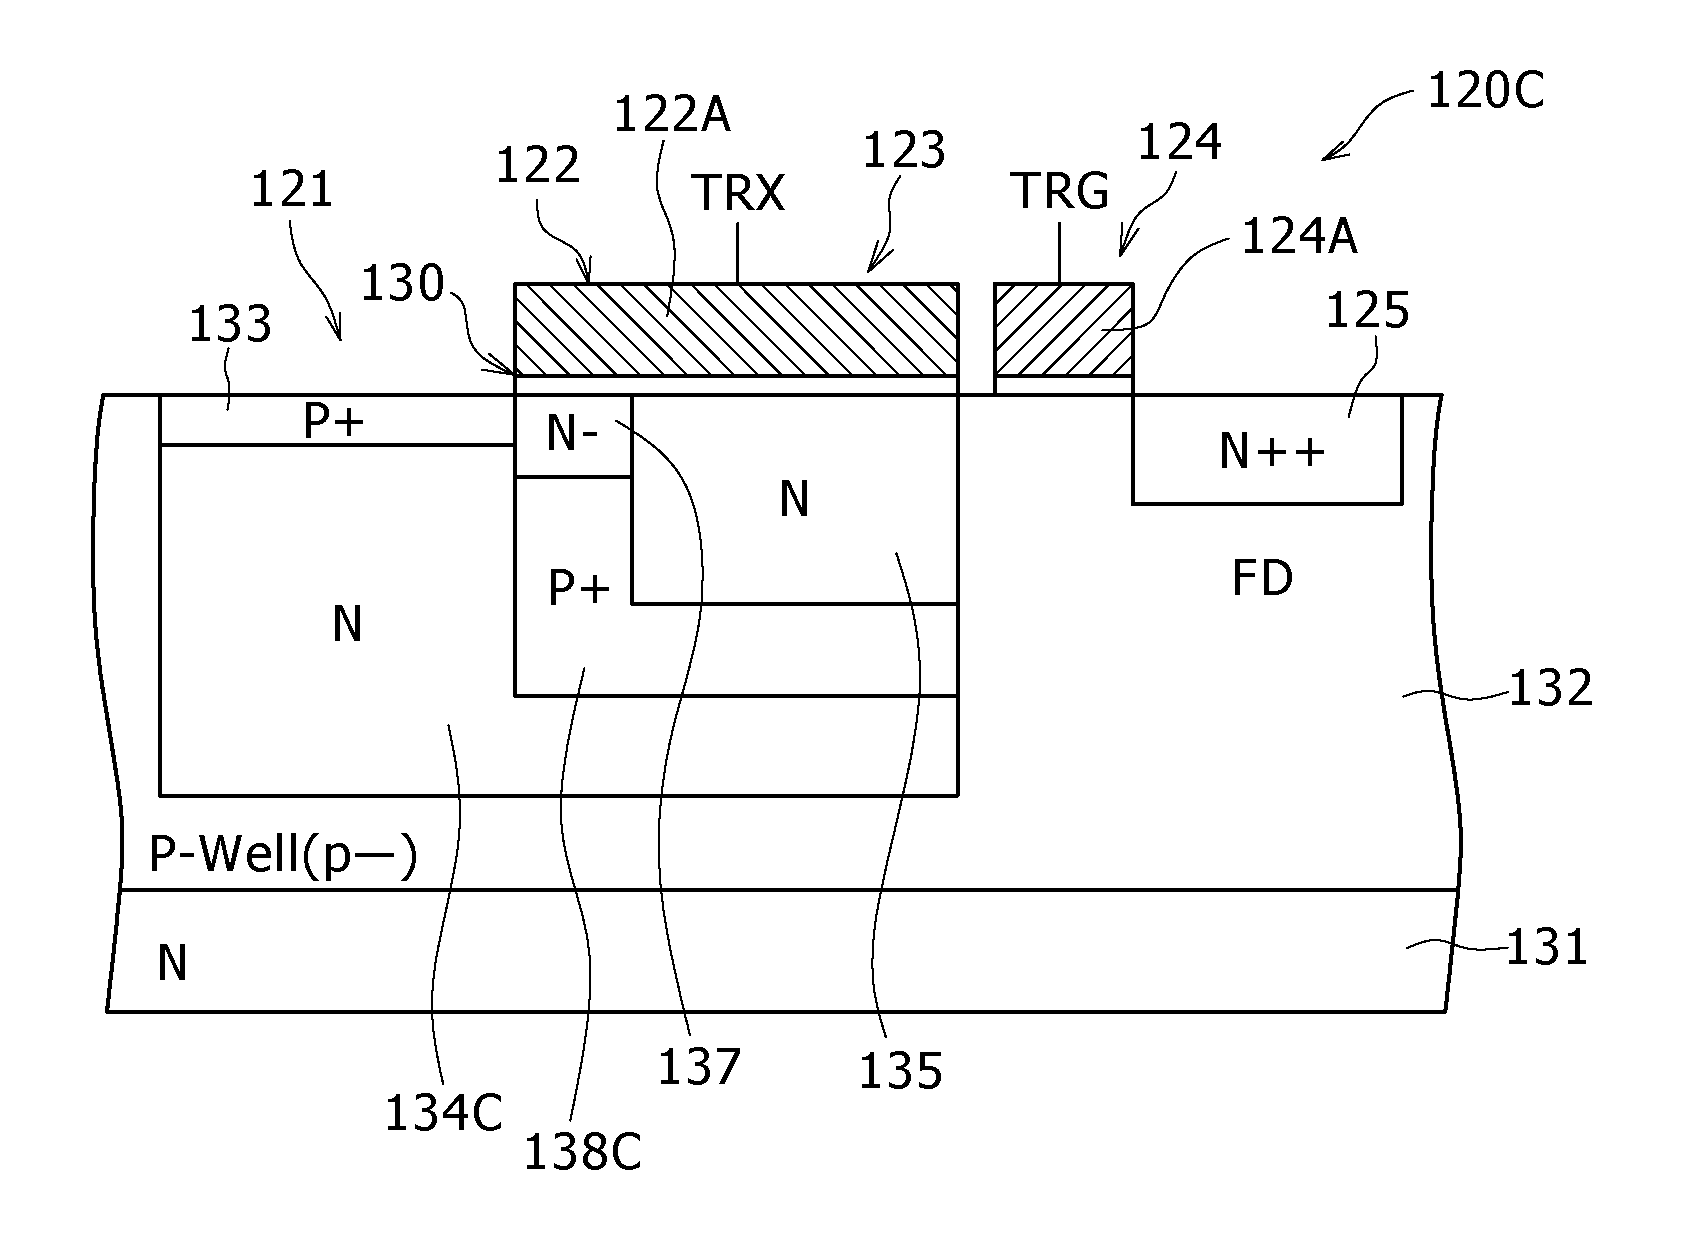 Solid-state imaging device, method of manufacturing solid-state imaging device, and electronic apparatus